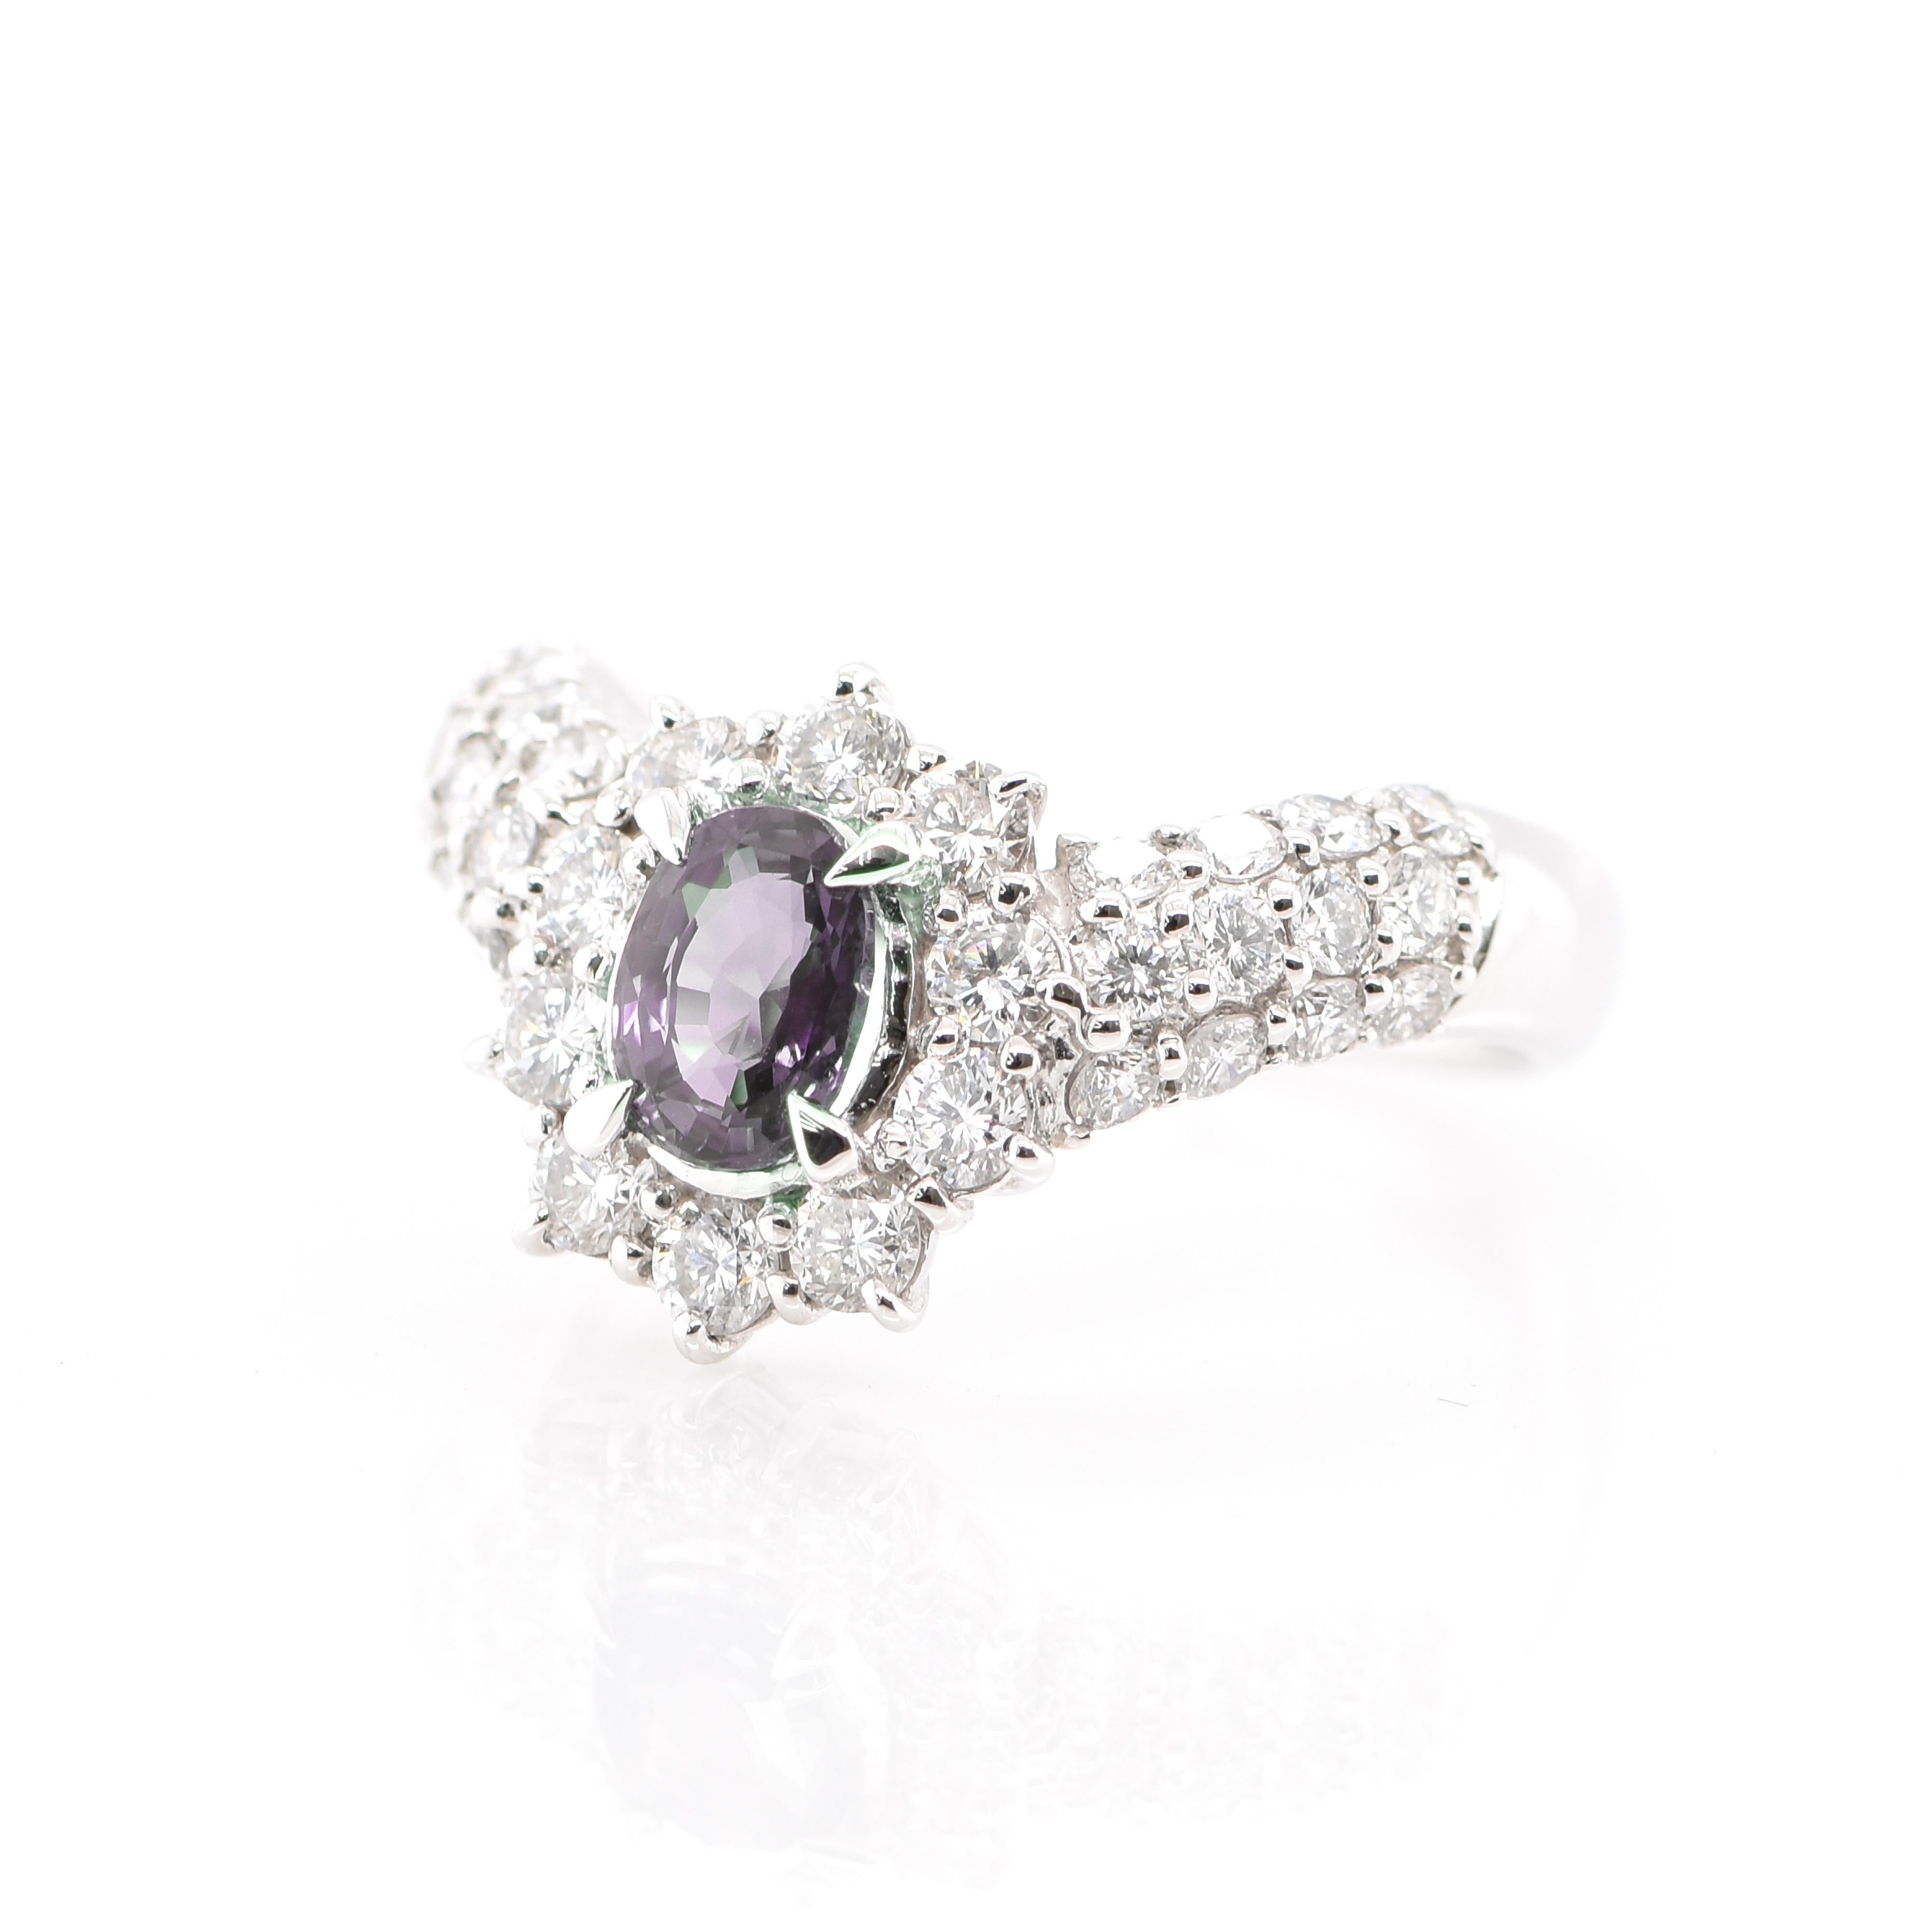 Oval Cut 0.88 Carat Alexandrite and Diamond Cluster Ring Set in Platinum